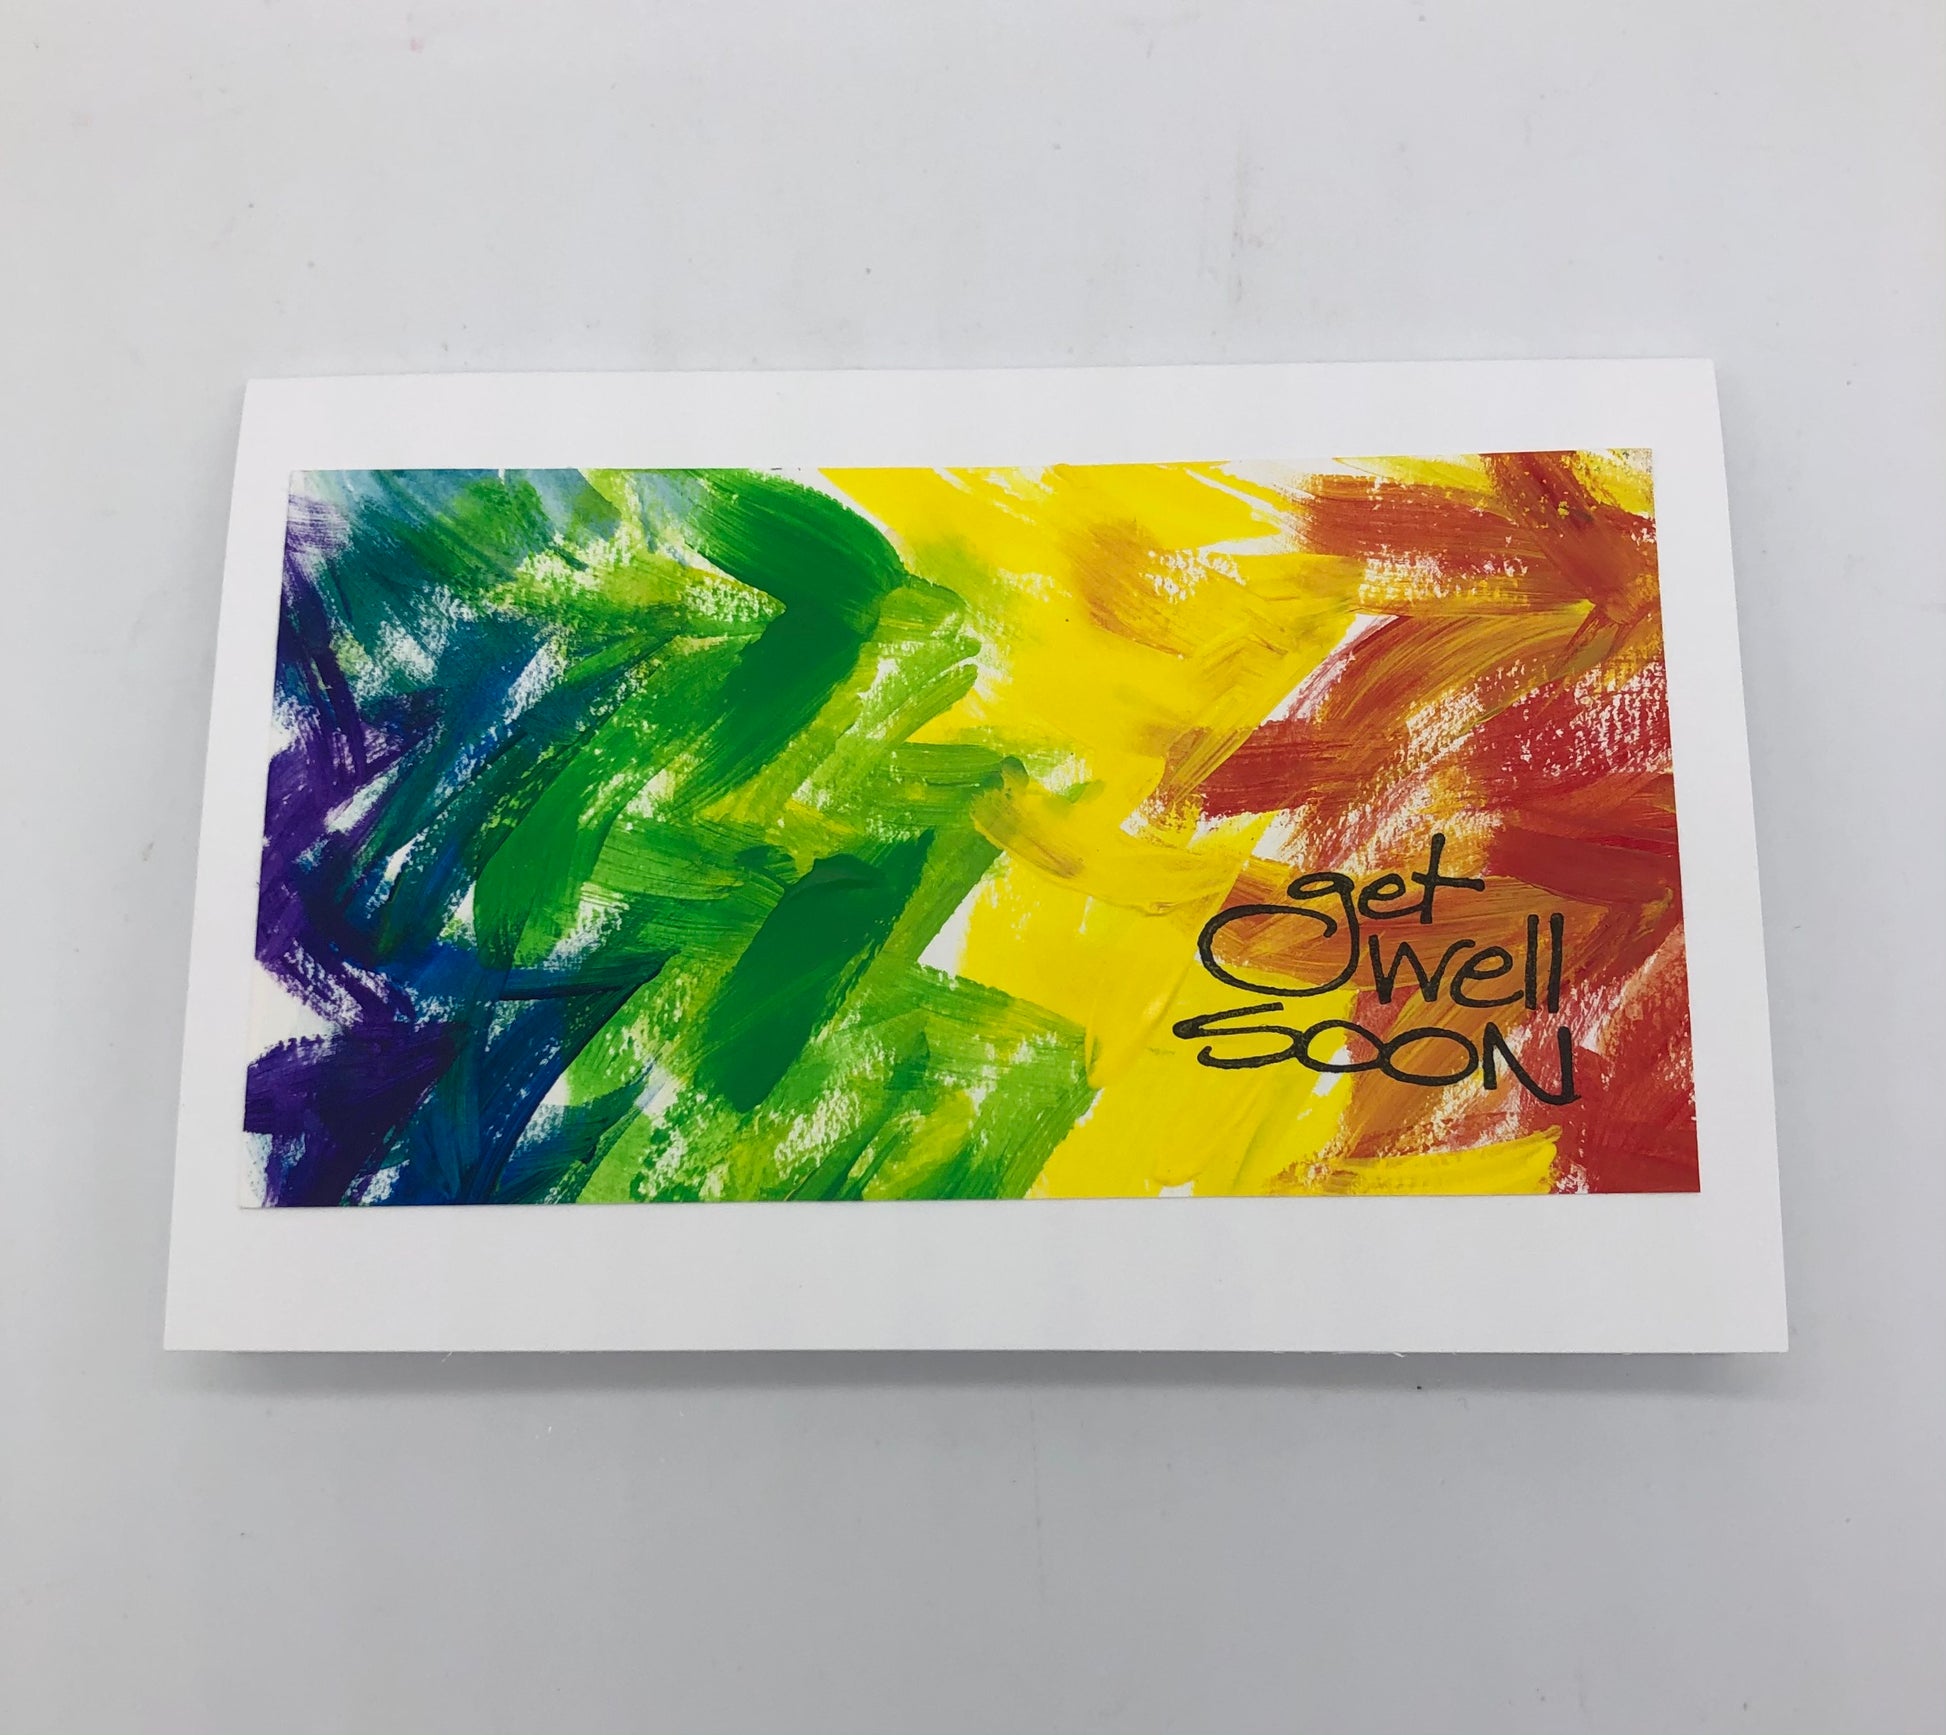 White greeting card with acrylic painting.  Painting is rainbow colors in vertical chevron design, with red on the right, then orange, yellow, green, blue and purple.  On top of the painted design it says get well soon in a black stamp.